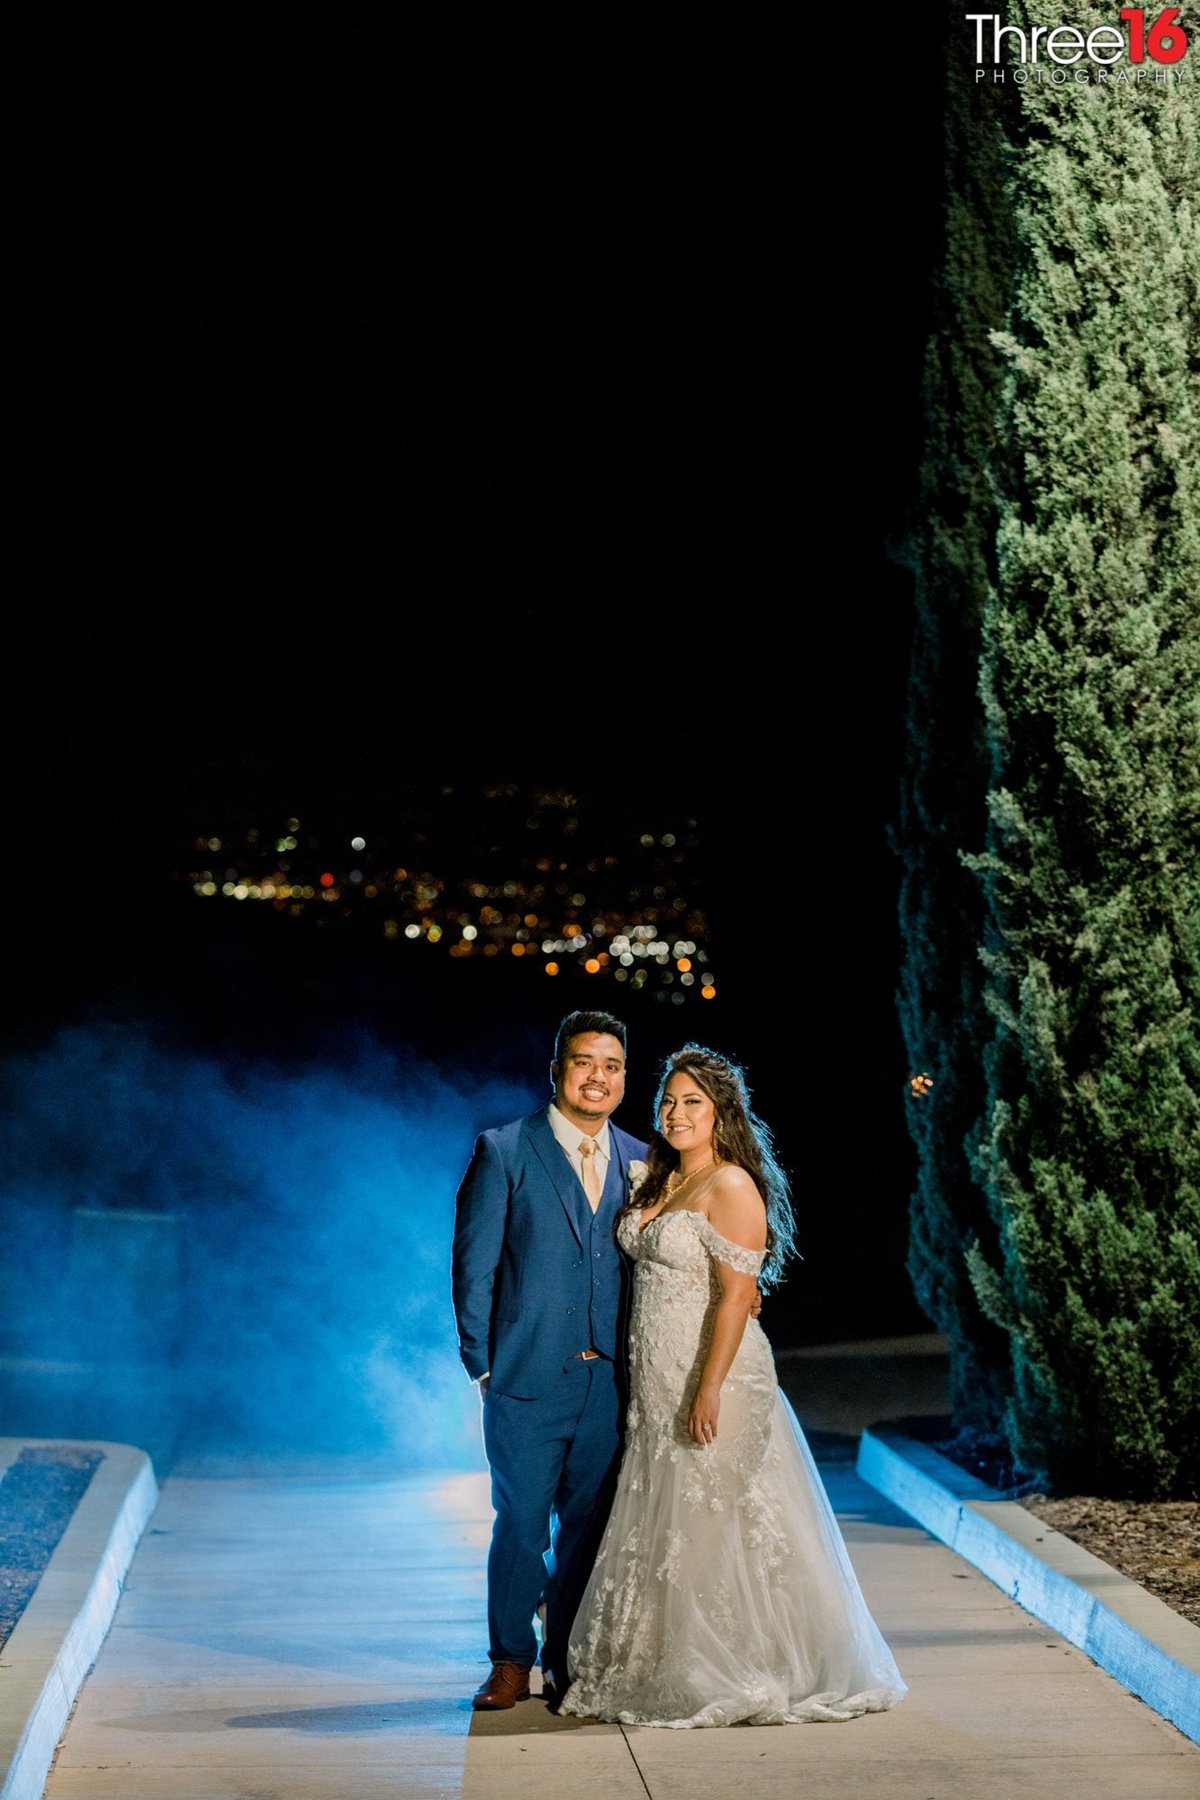 Bride and Groom pose together for a night shot